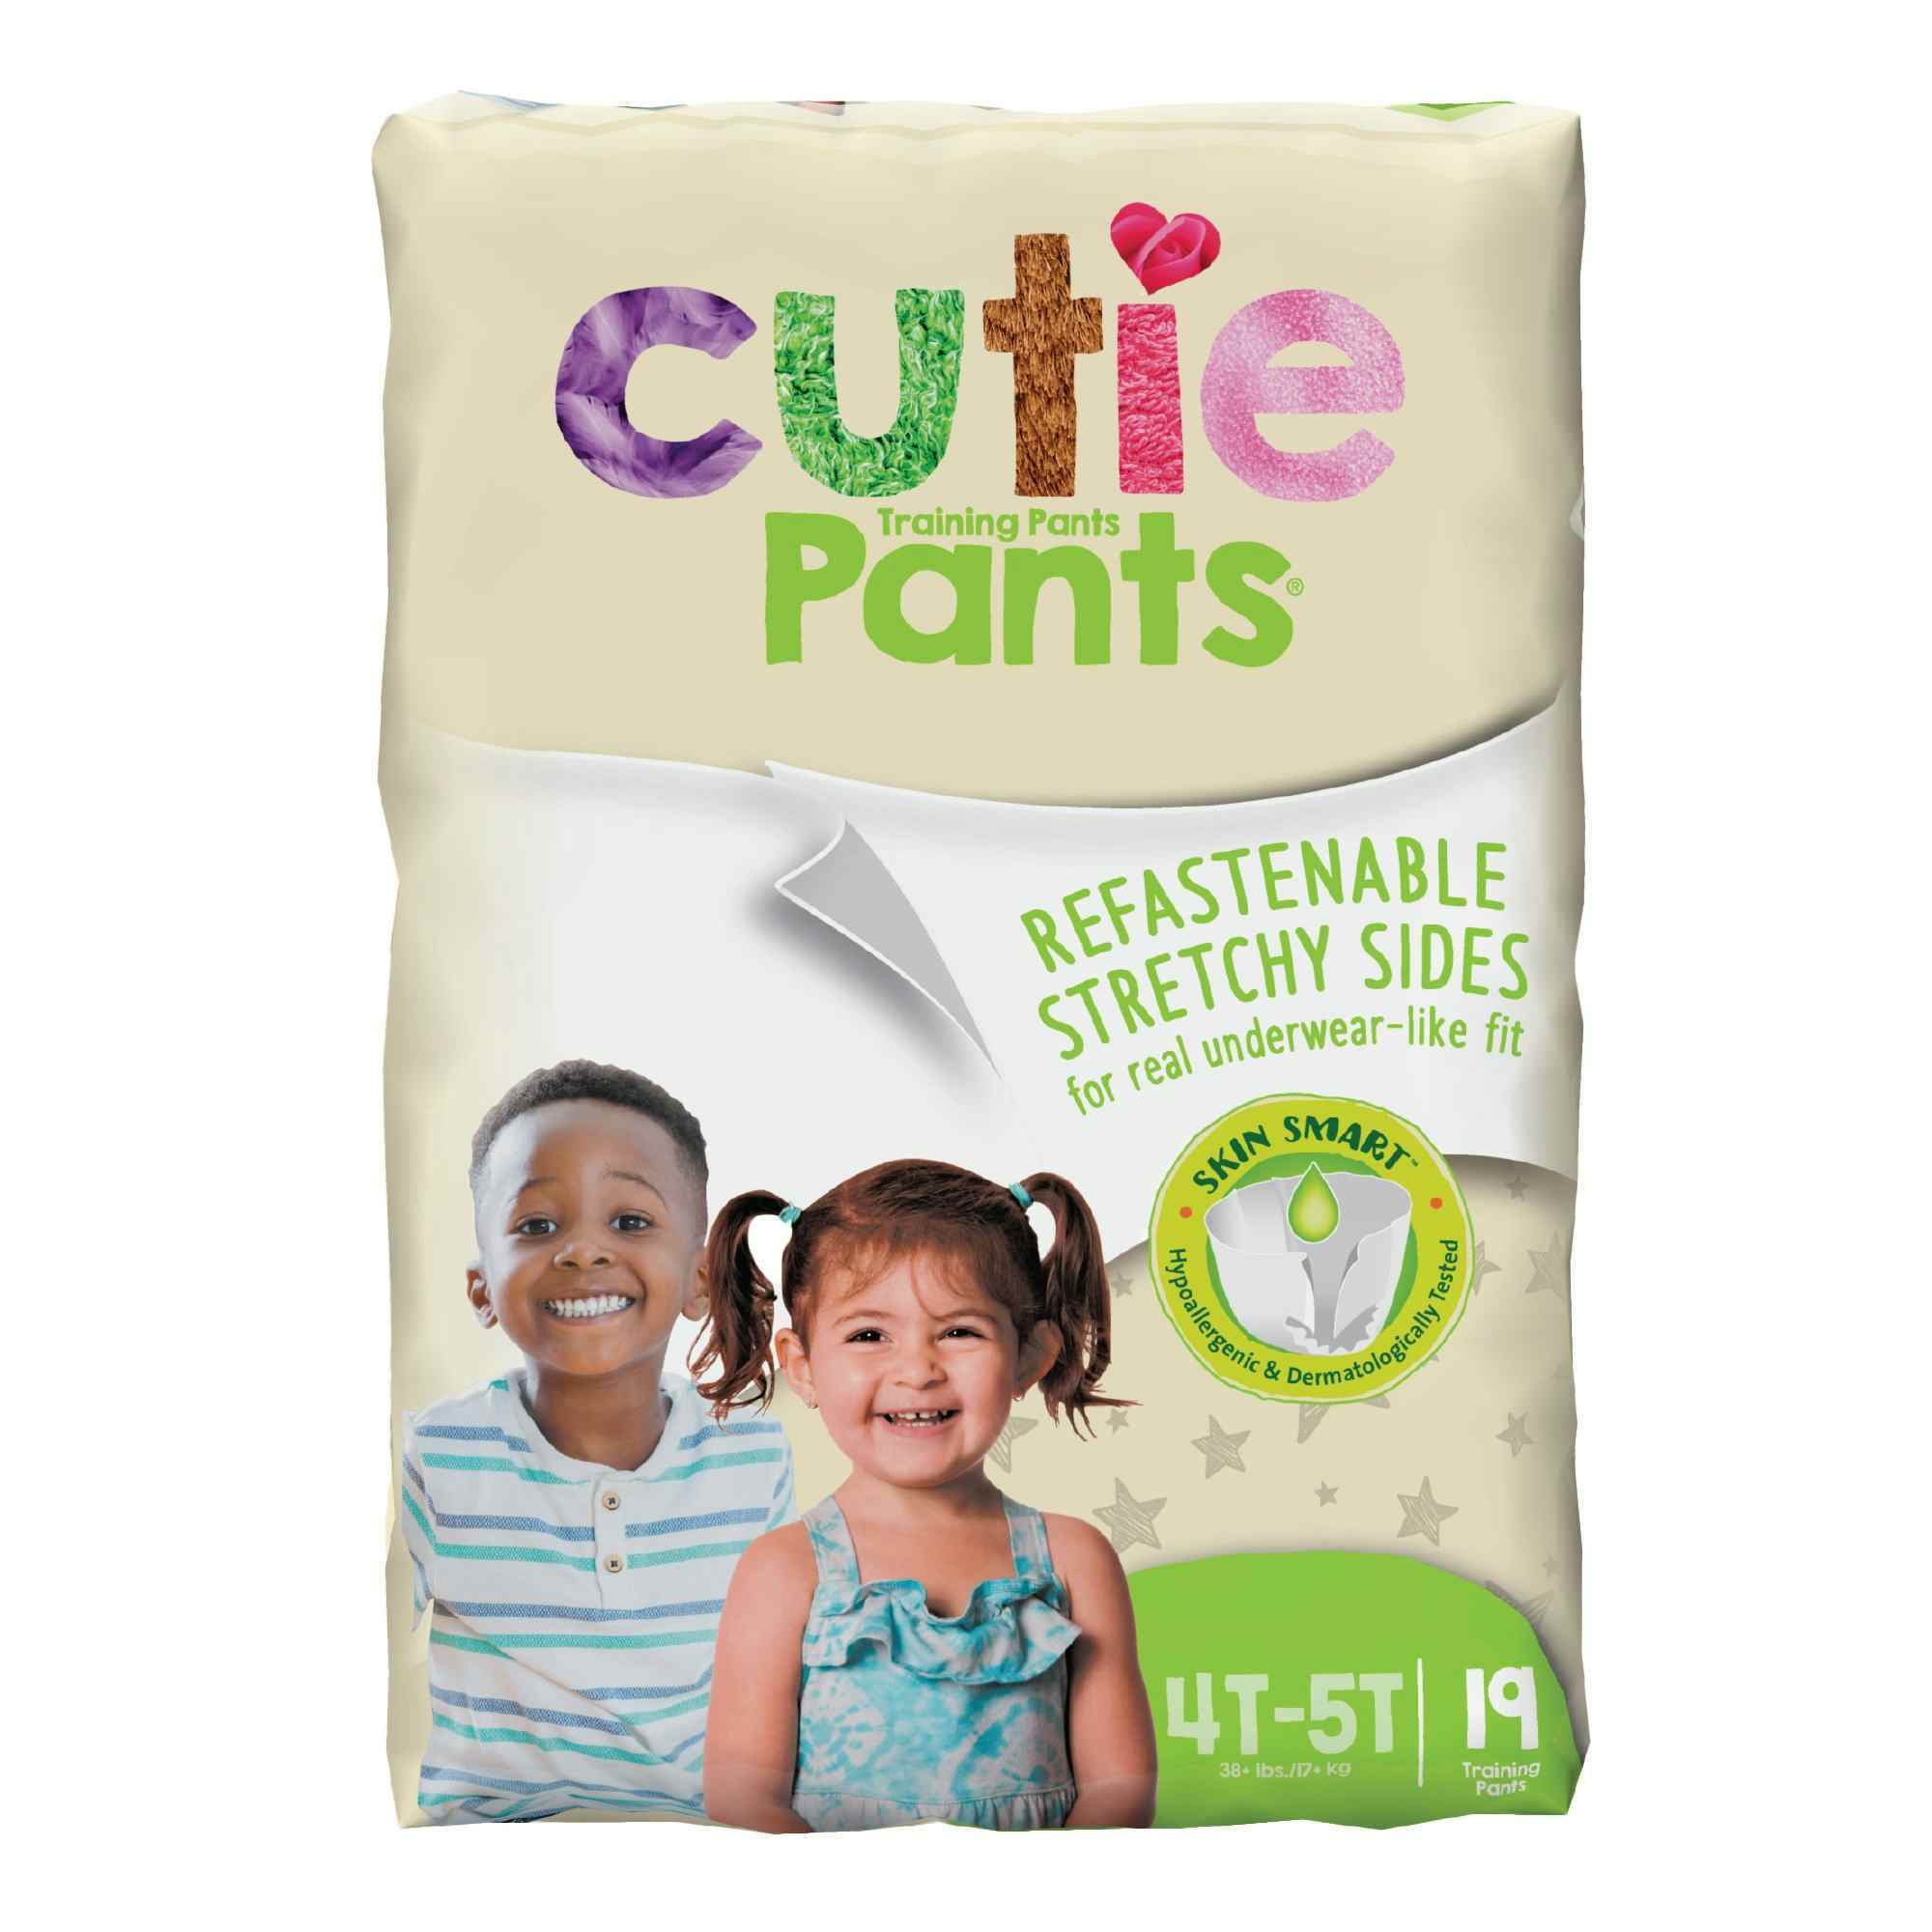 Cutie Pants Toddler Disposable Training Pants Pull ups, Heavy, WP9001/1, Size 4T-5T Over 35 lbs - Pack of 19